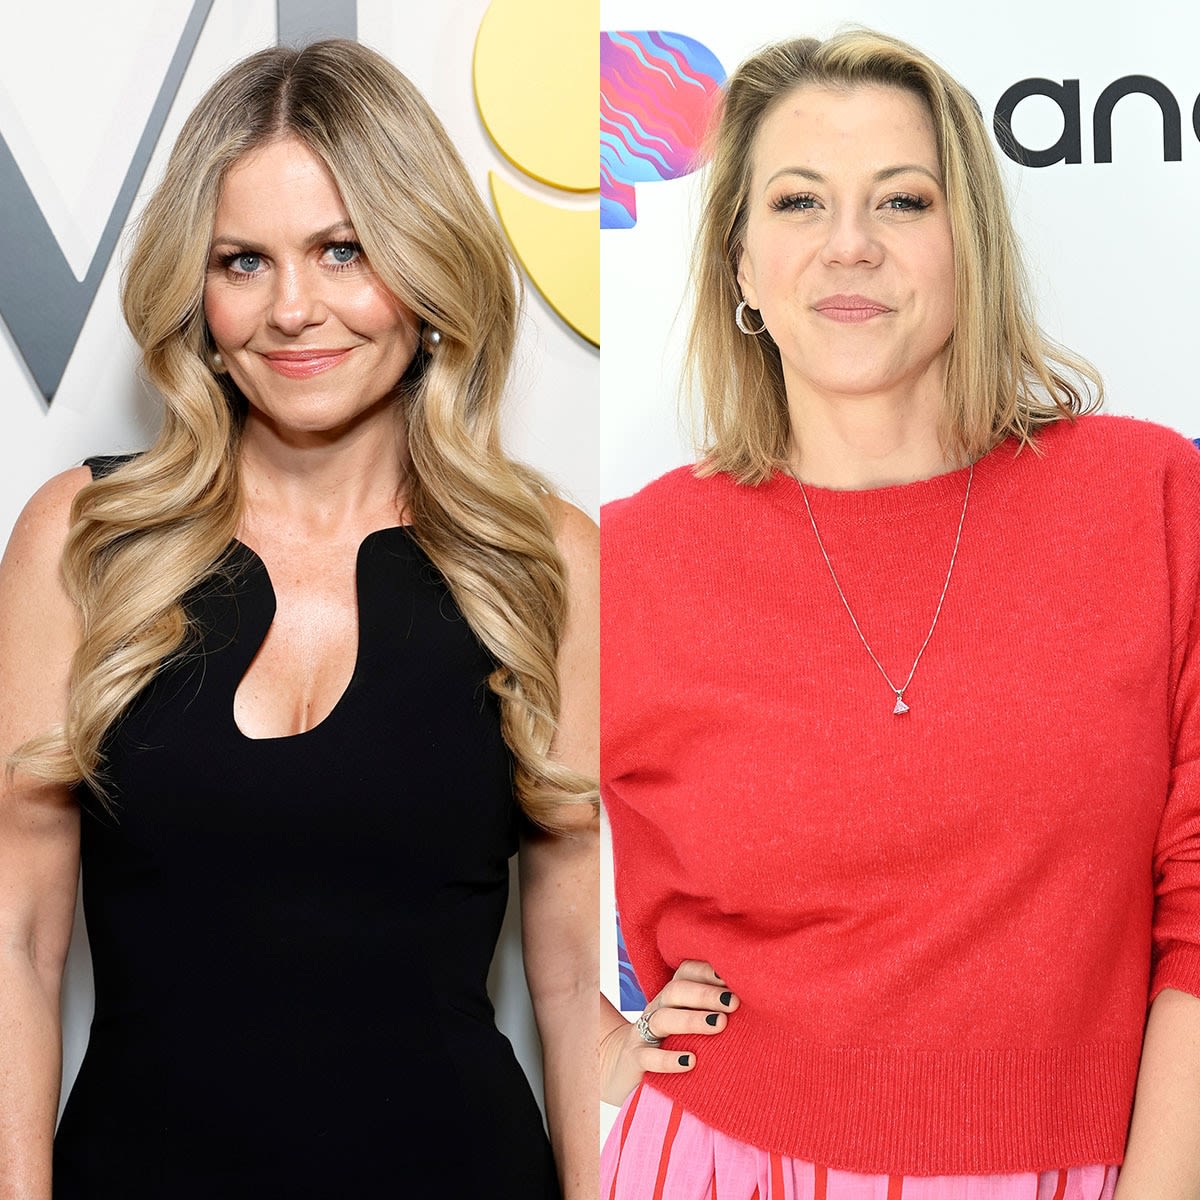 Jodie Sweetin Defends Olympics Show After Candace Cameron Bure Comment